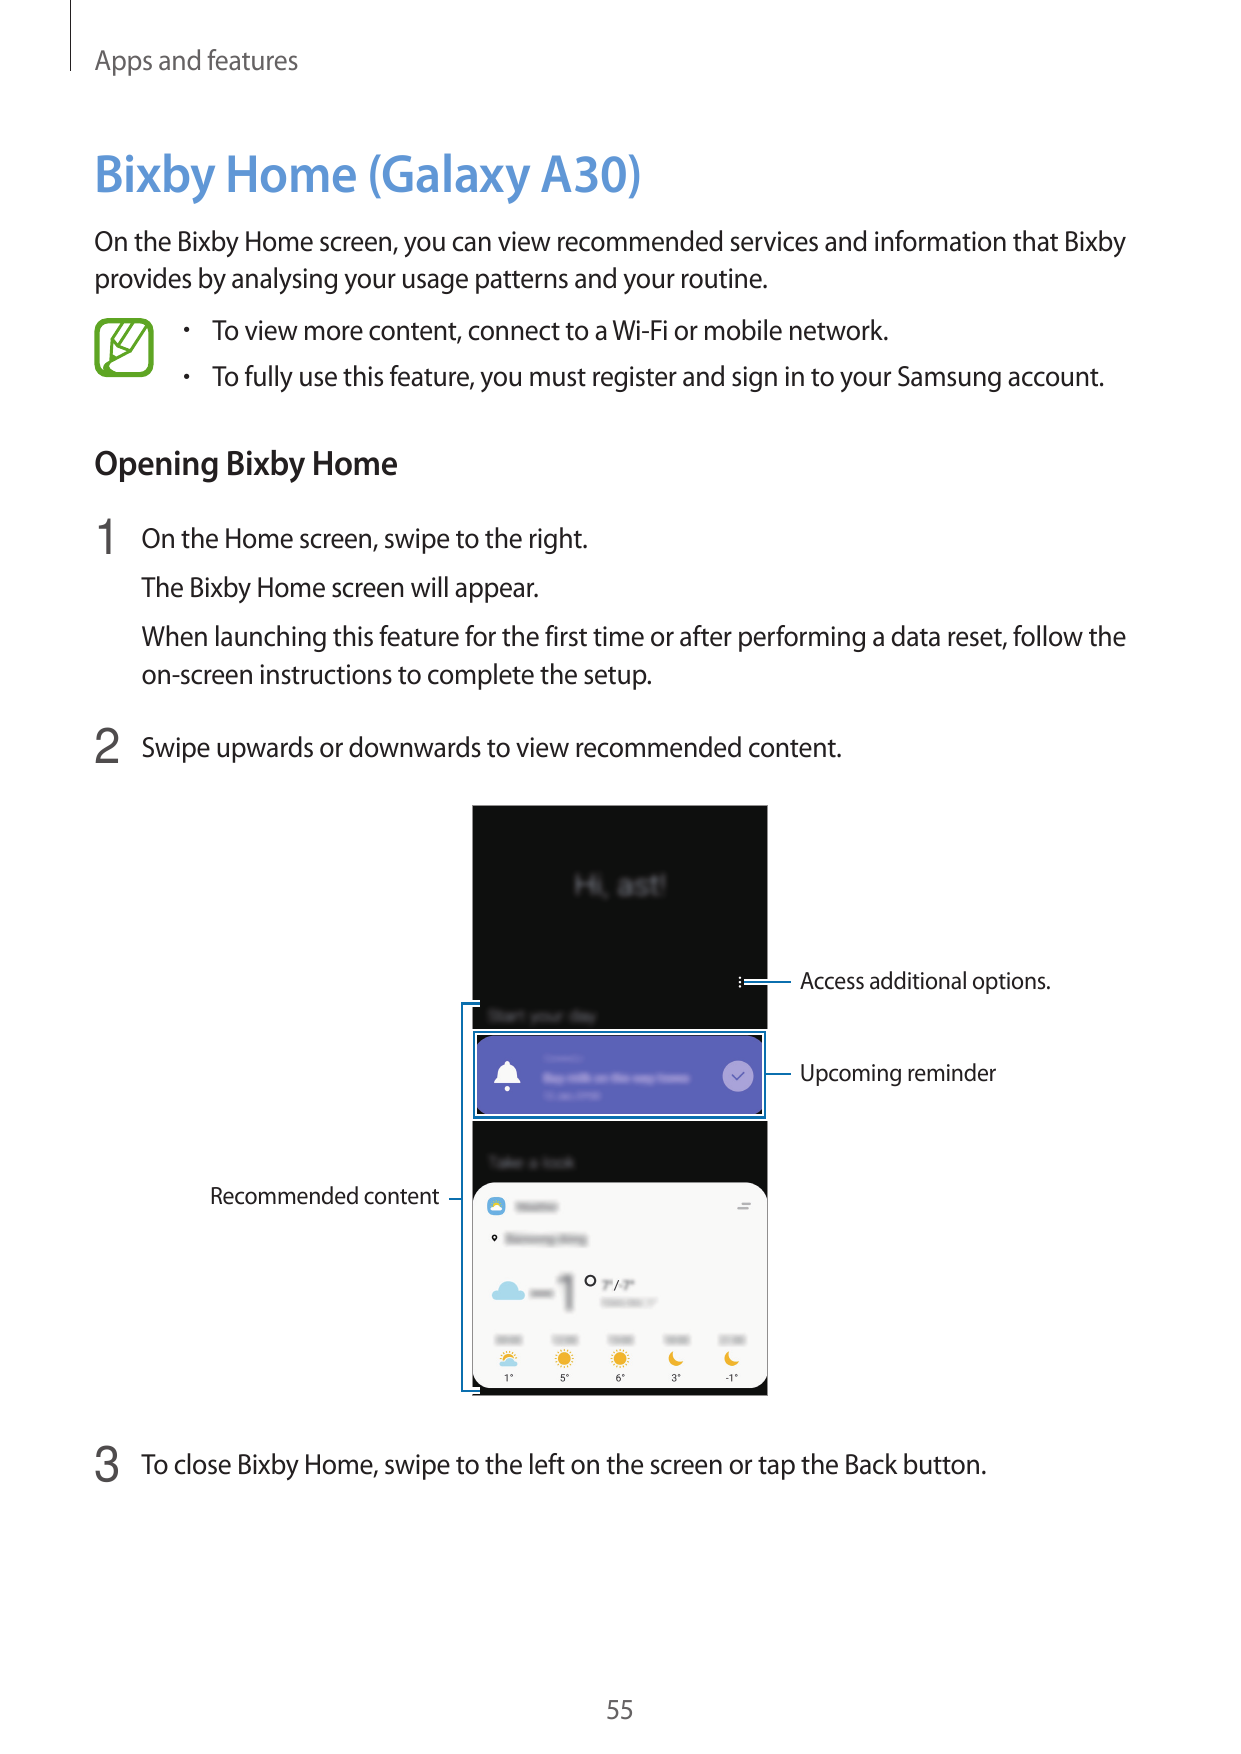 Apps and featuresBixby Home (Galaxy A30)On the Bixby Home screen, you can view recommended services and information that Bixbypr